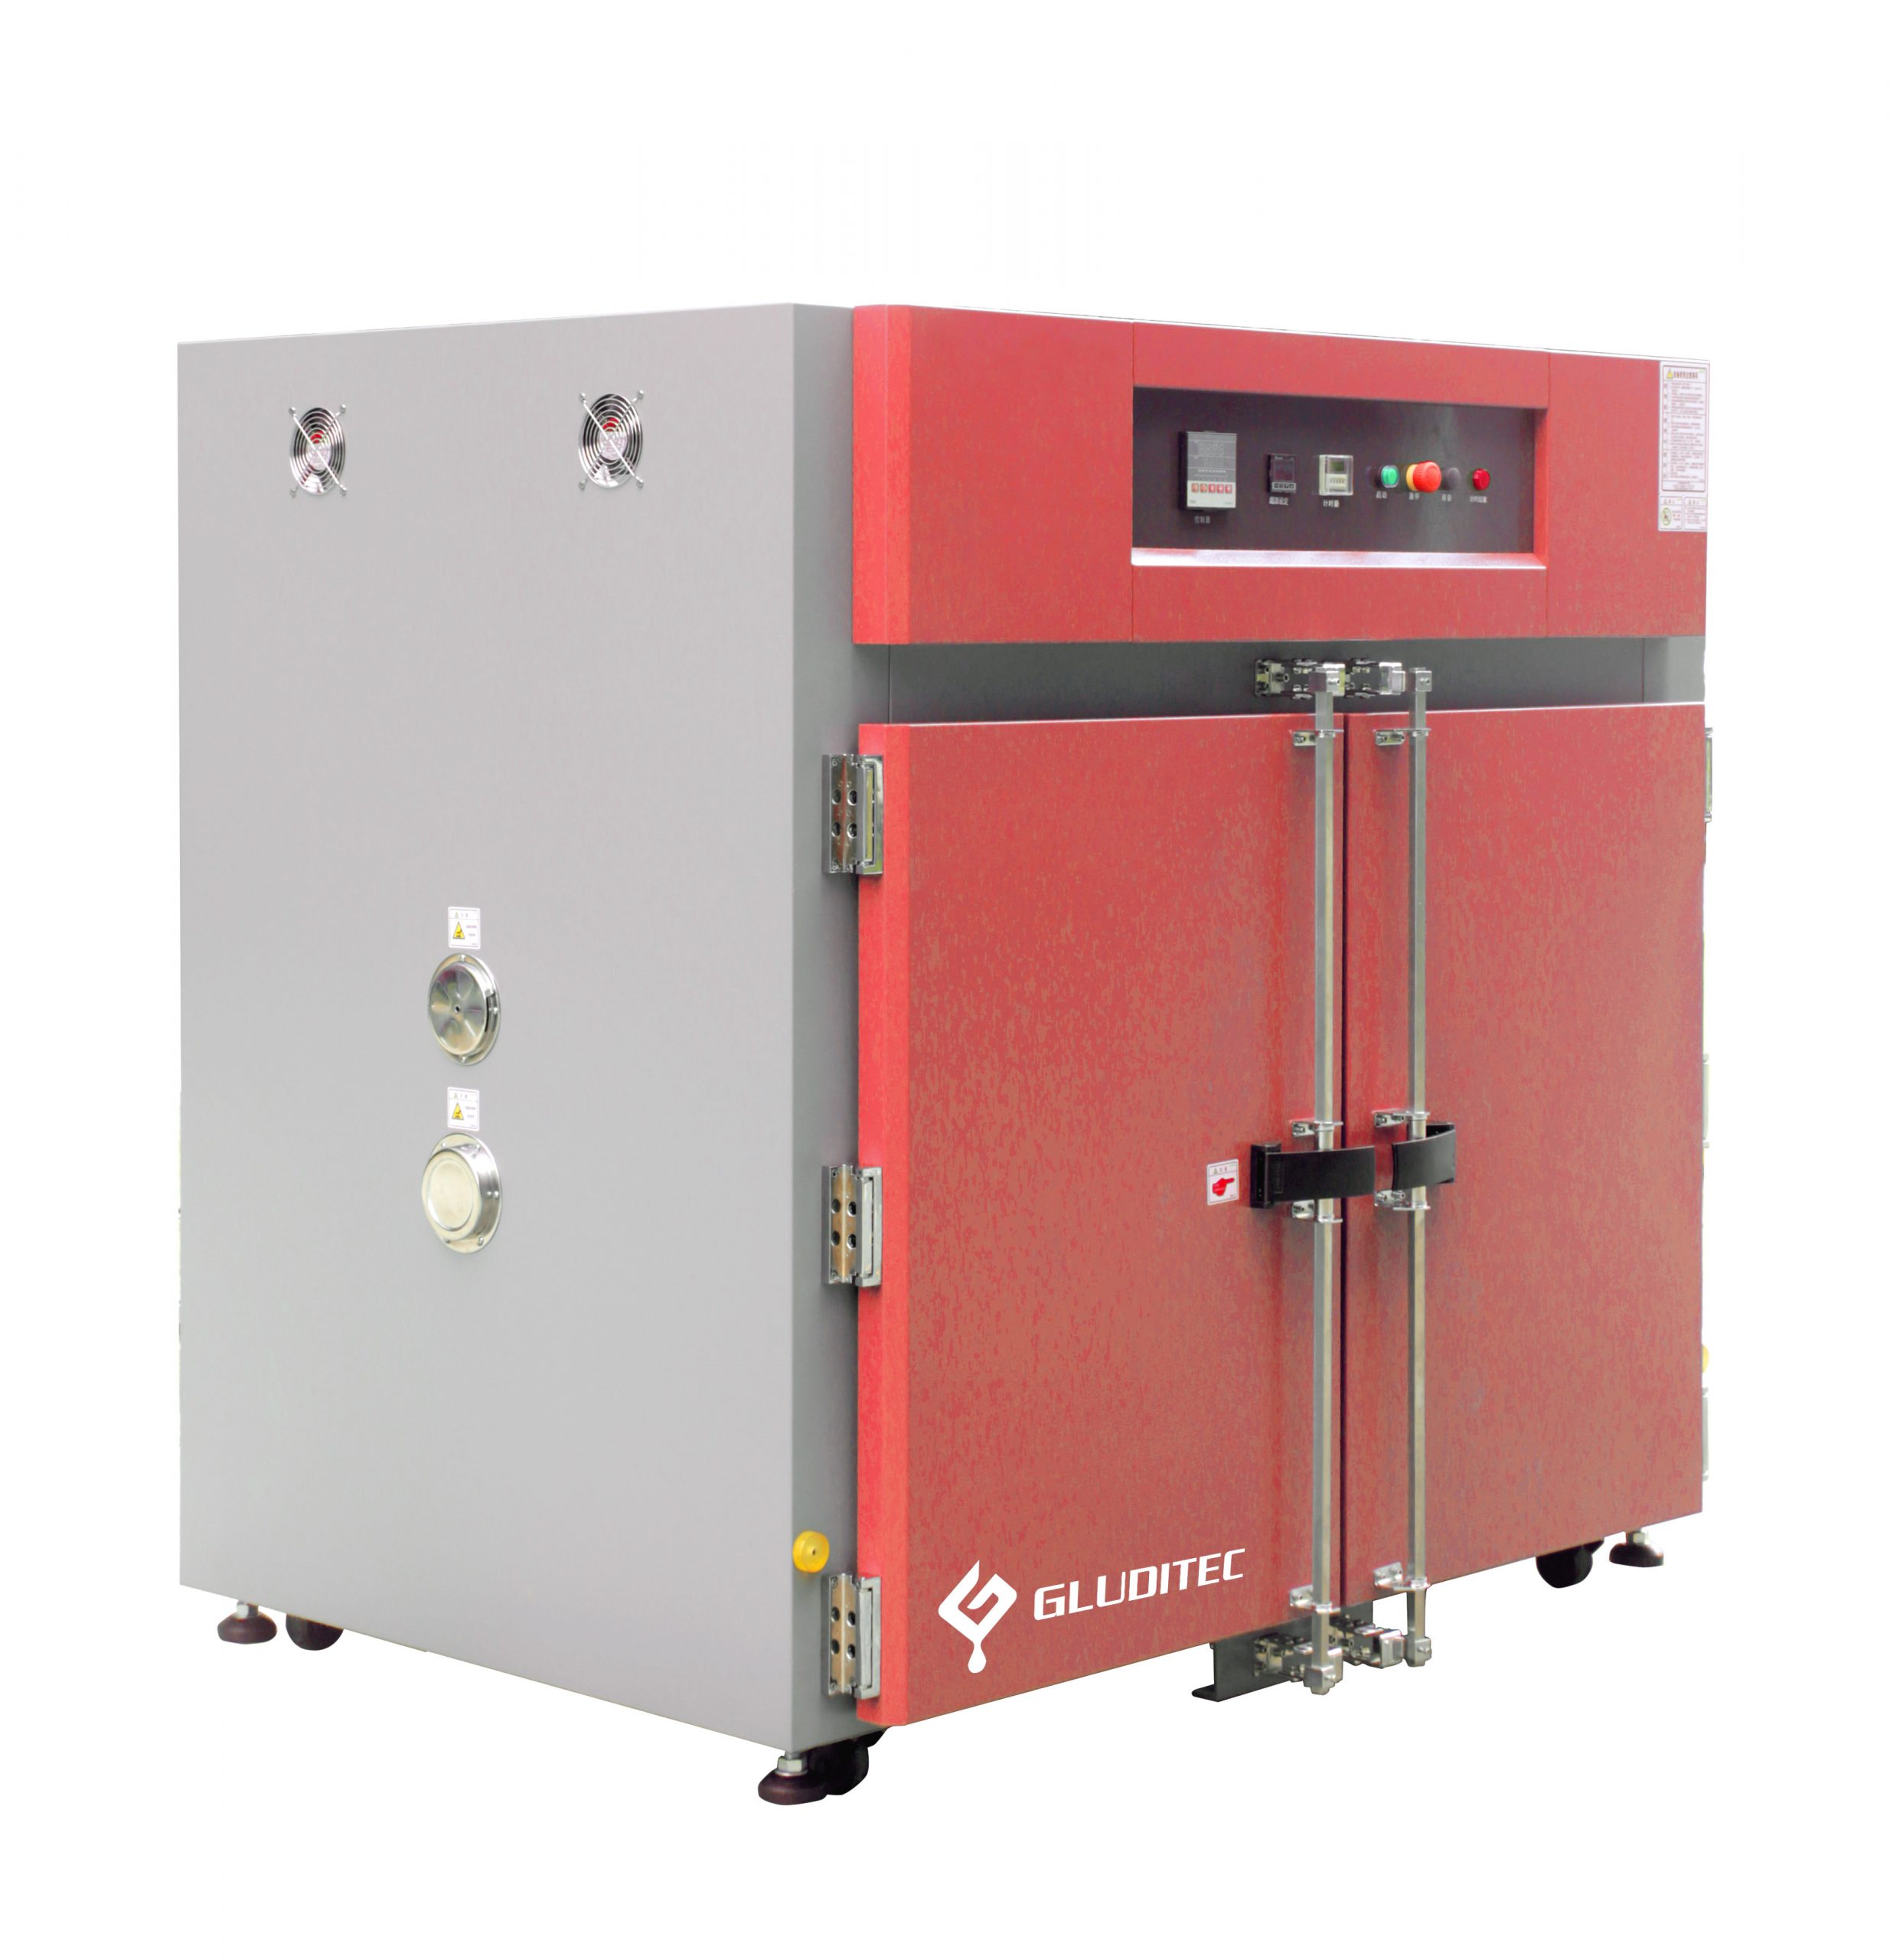 https://prostech.vn/wp-content/uploads/2021/05/GH-S1500-Industrial-Curing-Oven-scaled-1.jpg